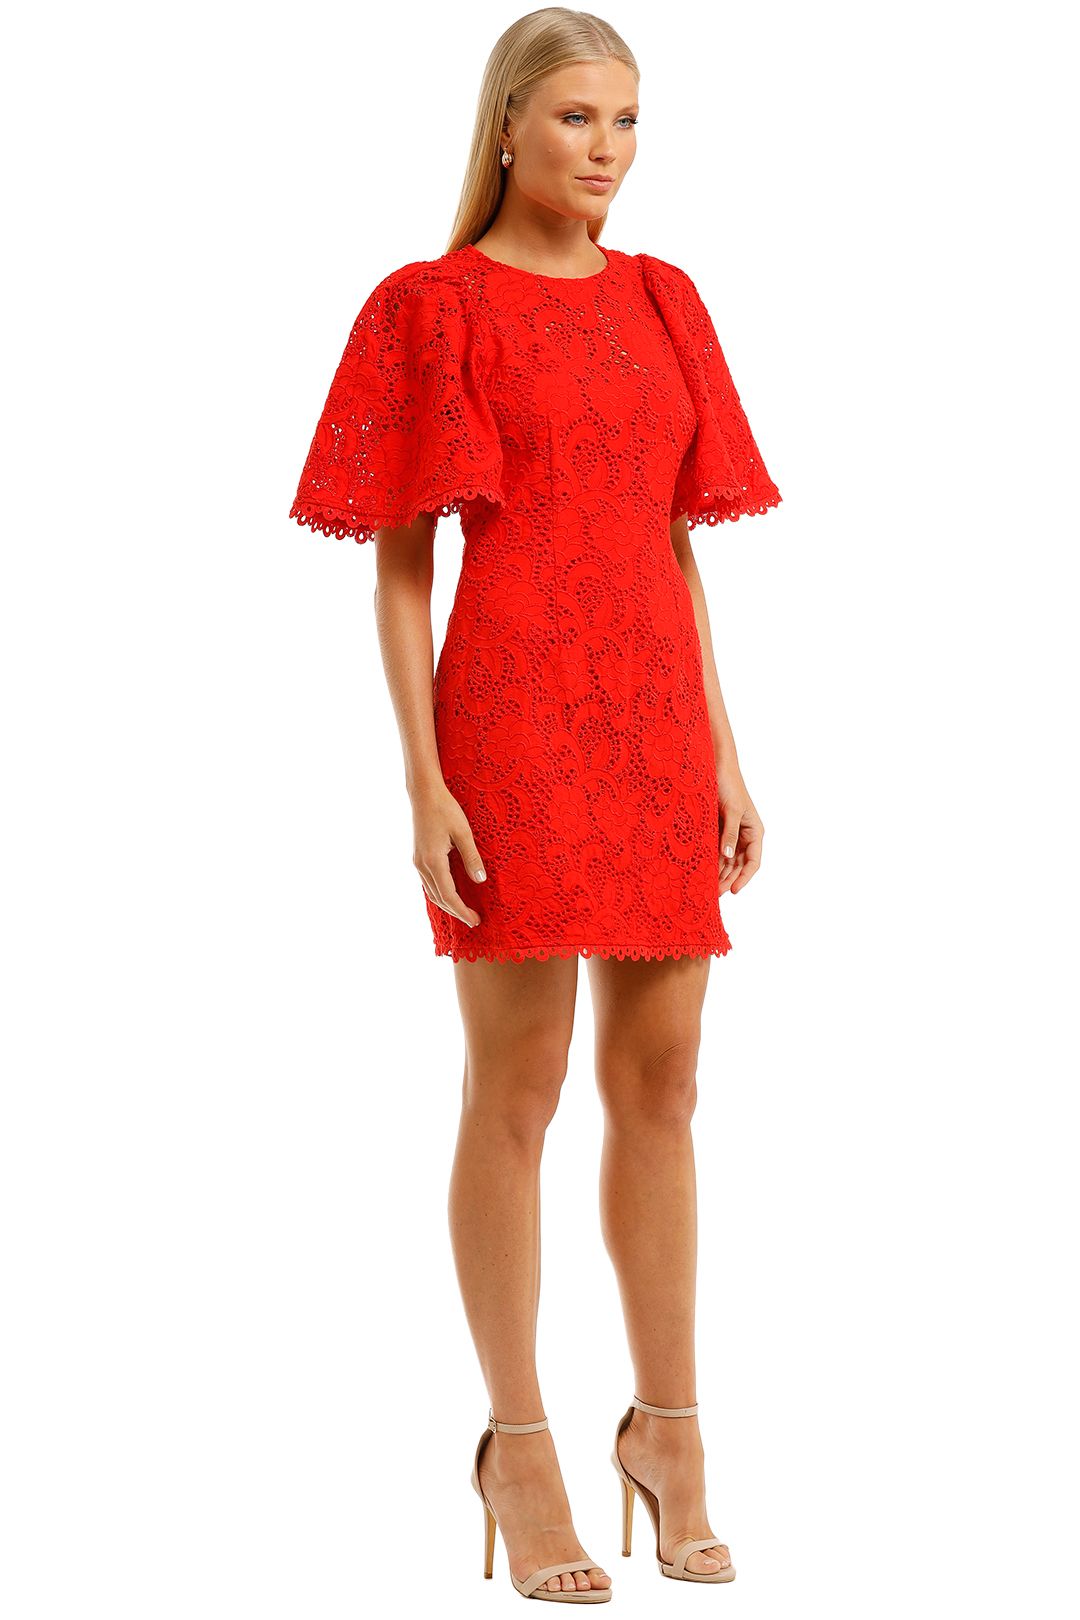 Talulah-Roses-Are-Red-Mini-Dress-Side